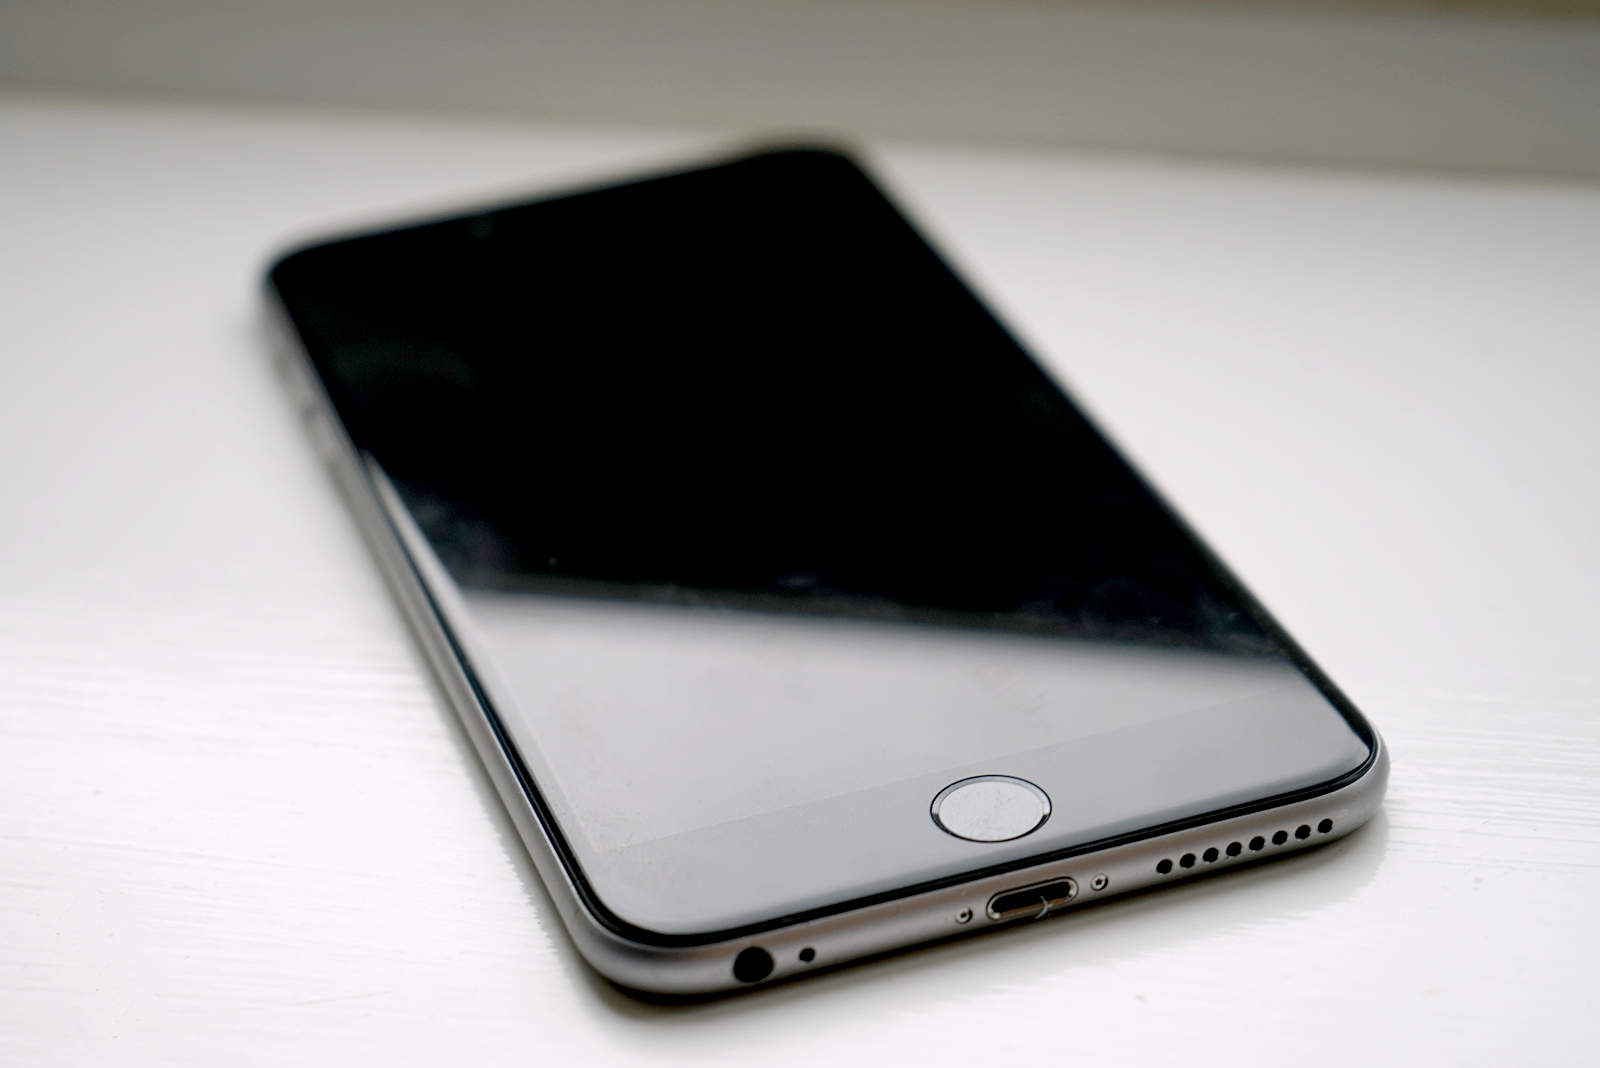 iPhone 7s Plus may get curved glass body | Cult of Mac